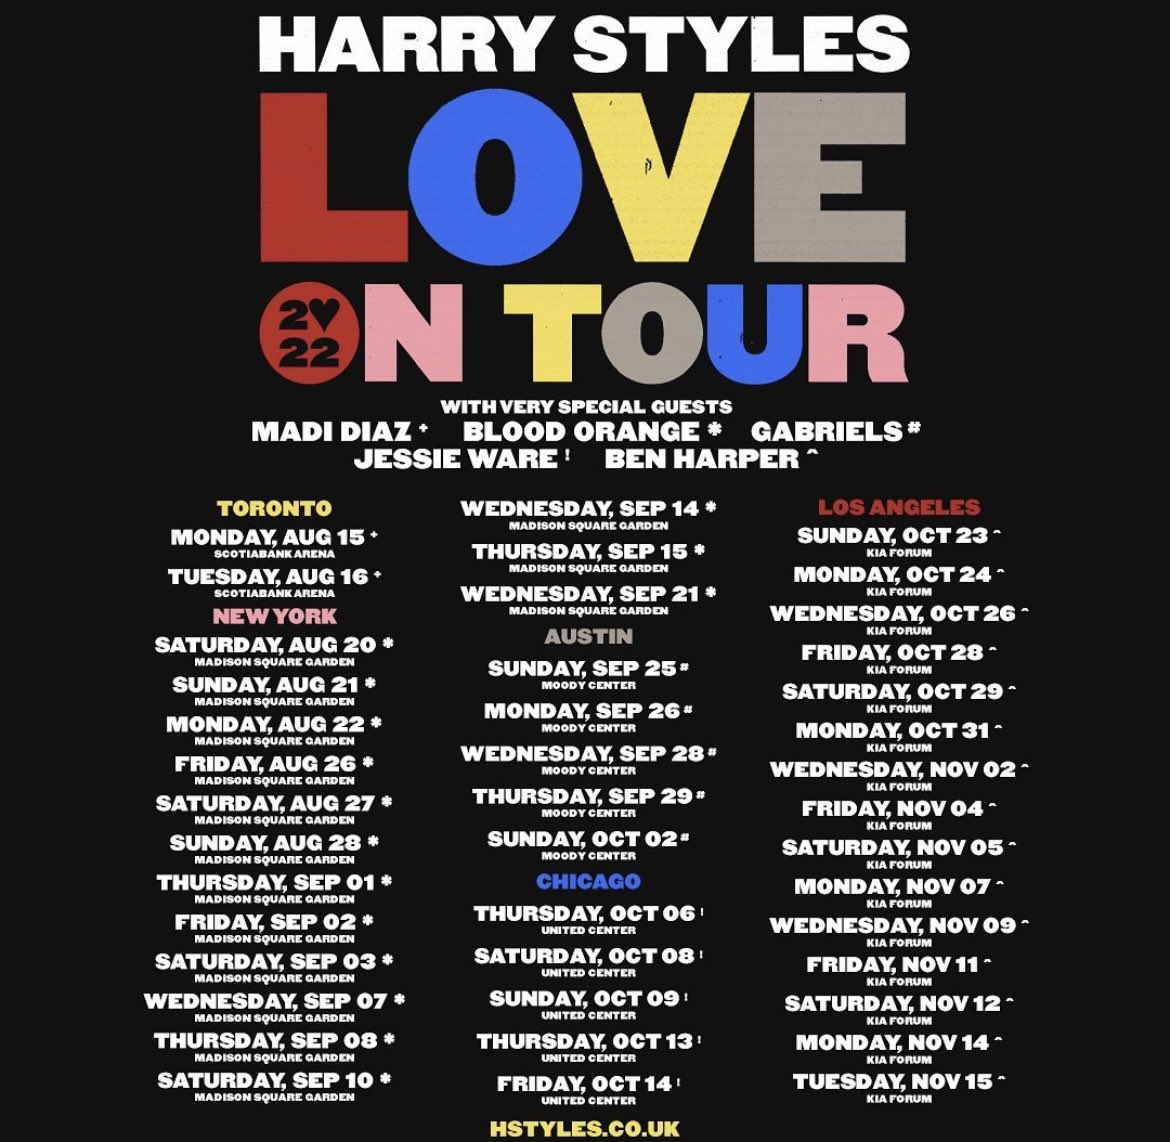 🥰HARRY STYLES LOVE ON TOUR PIT TICKET GIVEAWAY🥰 One lucky winner will get a FREE PIT TICKET to the Harry show of their choice!! -pls like/rt -pls follow me @faithharrylove & @akaAced -pls reply w/ what show you want & what Harry means to you!! INTERNATIONAL & ENDS 7/10!!